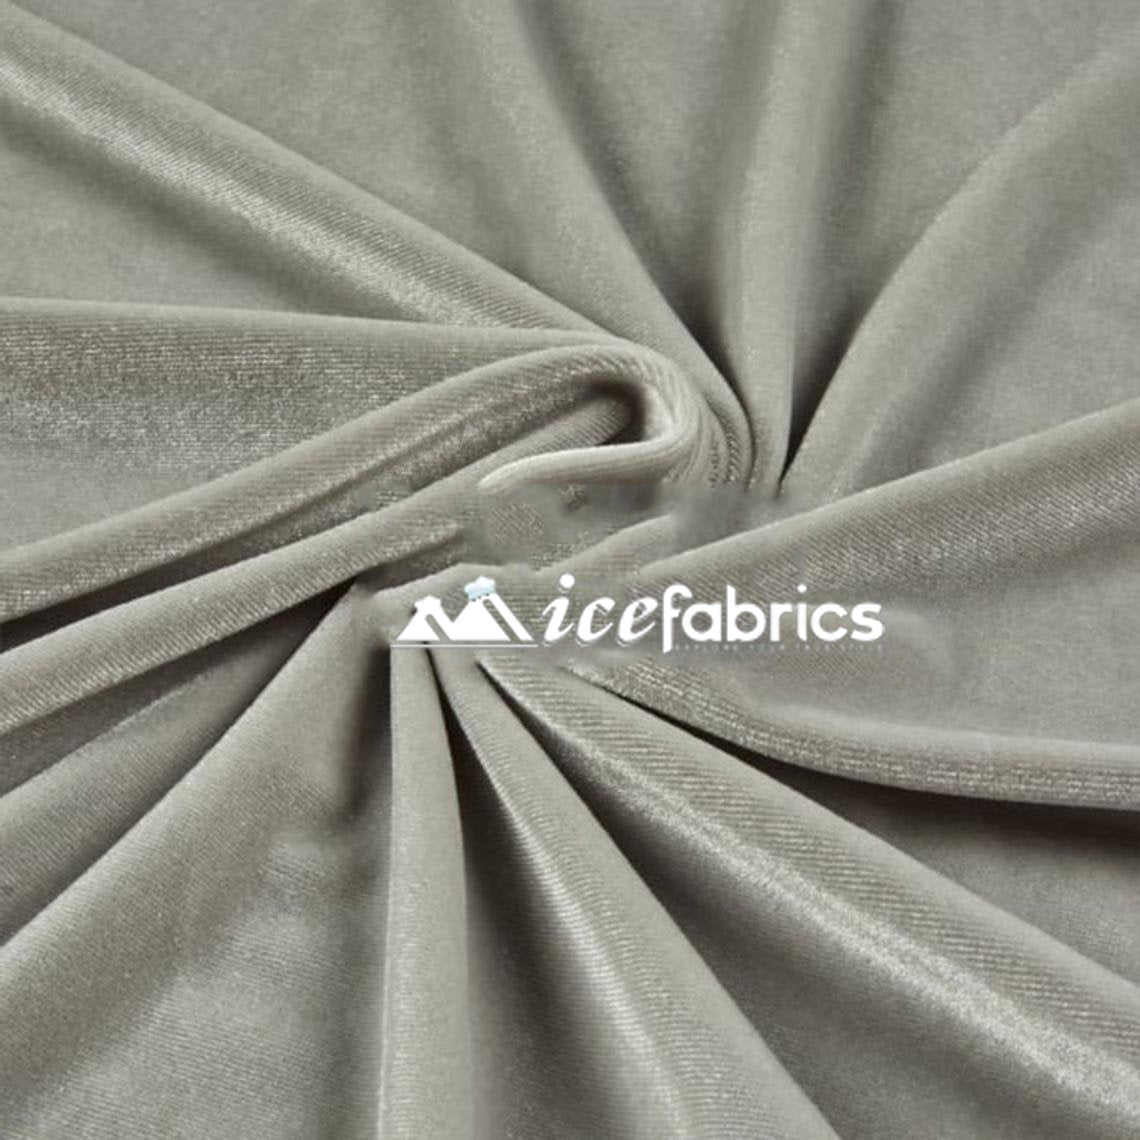 Hight Quality Stretch Velvet Fabric By The Roll (20 yards) Wholesale FabricVelvet FabricICE FABRICSICE FABRICSSilverBy The Roll (60" Wide)Hight Quality Stretch Velvet Fabric By The Roll (20 yards) Wholesale Fabric ICE FABRICS Silver